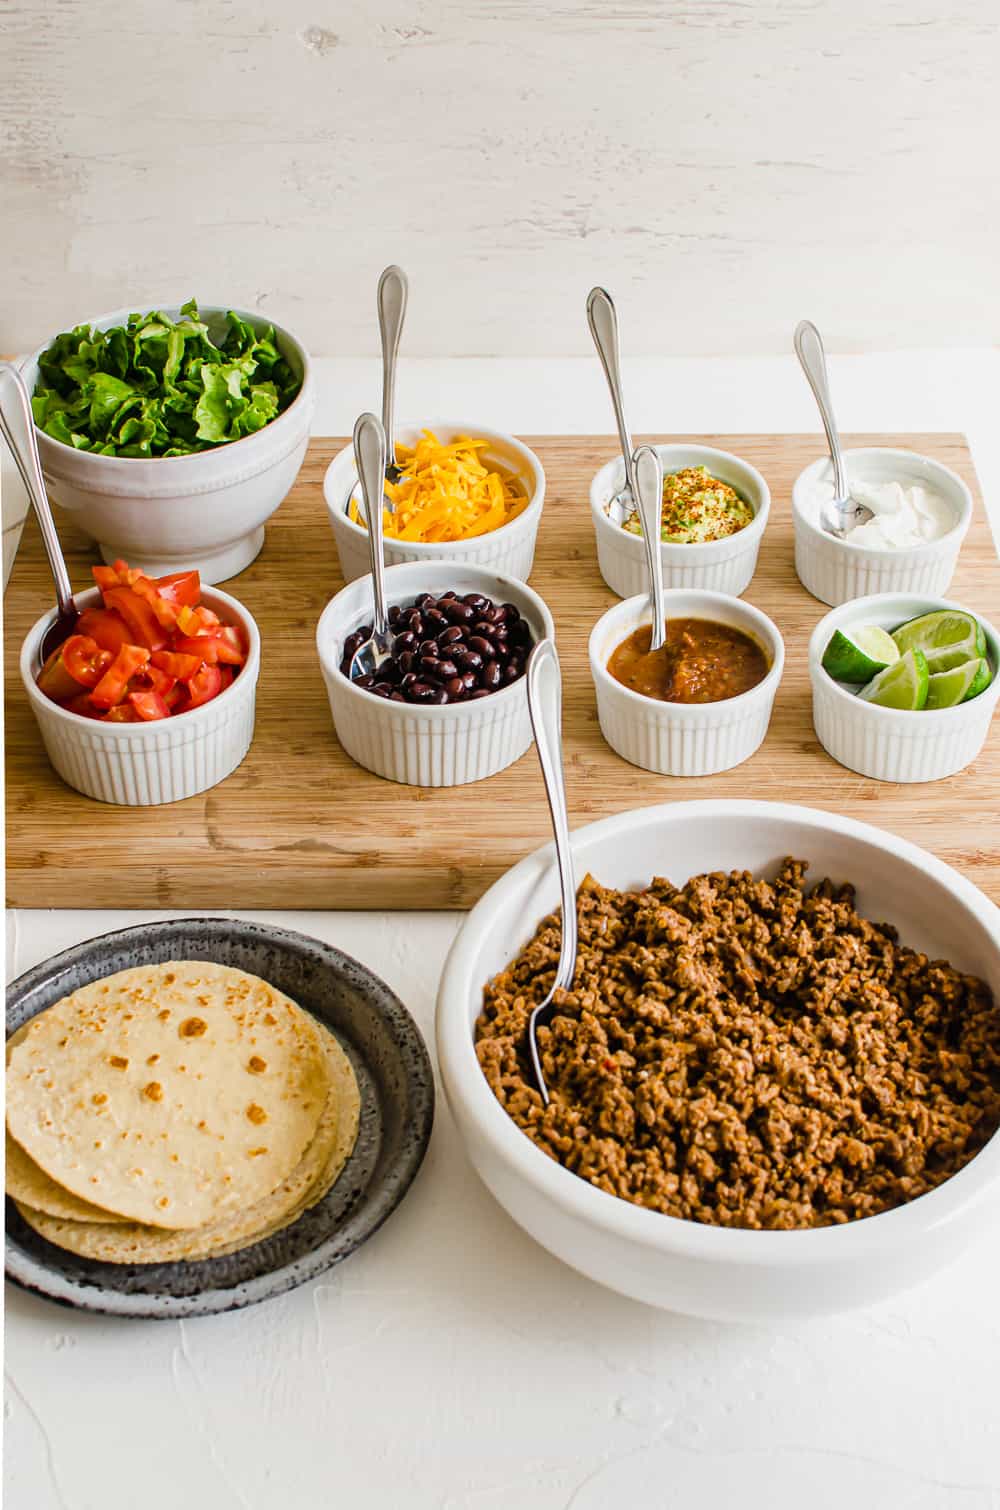 Totally Tasty Taco Bar (Great for Groups!)